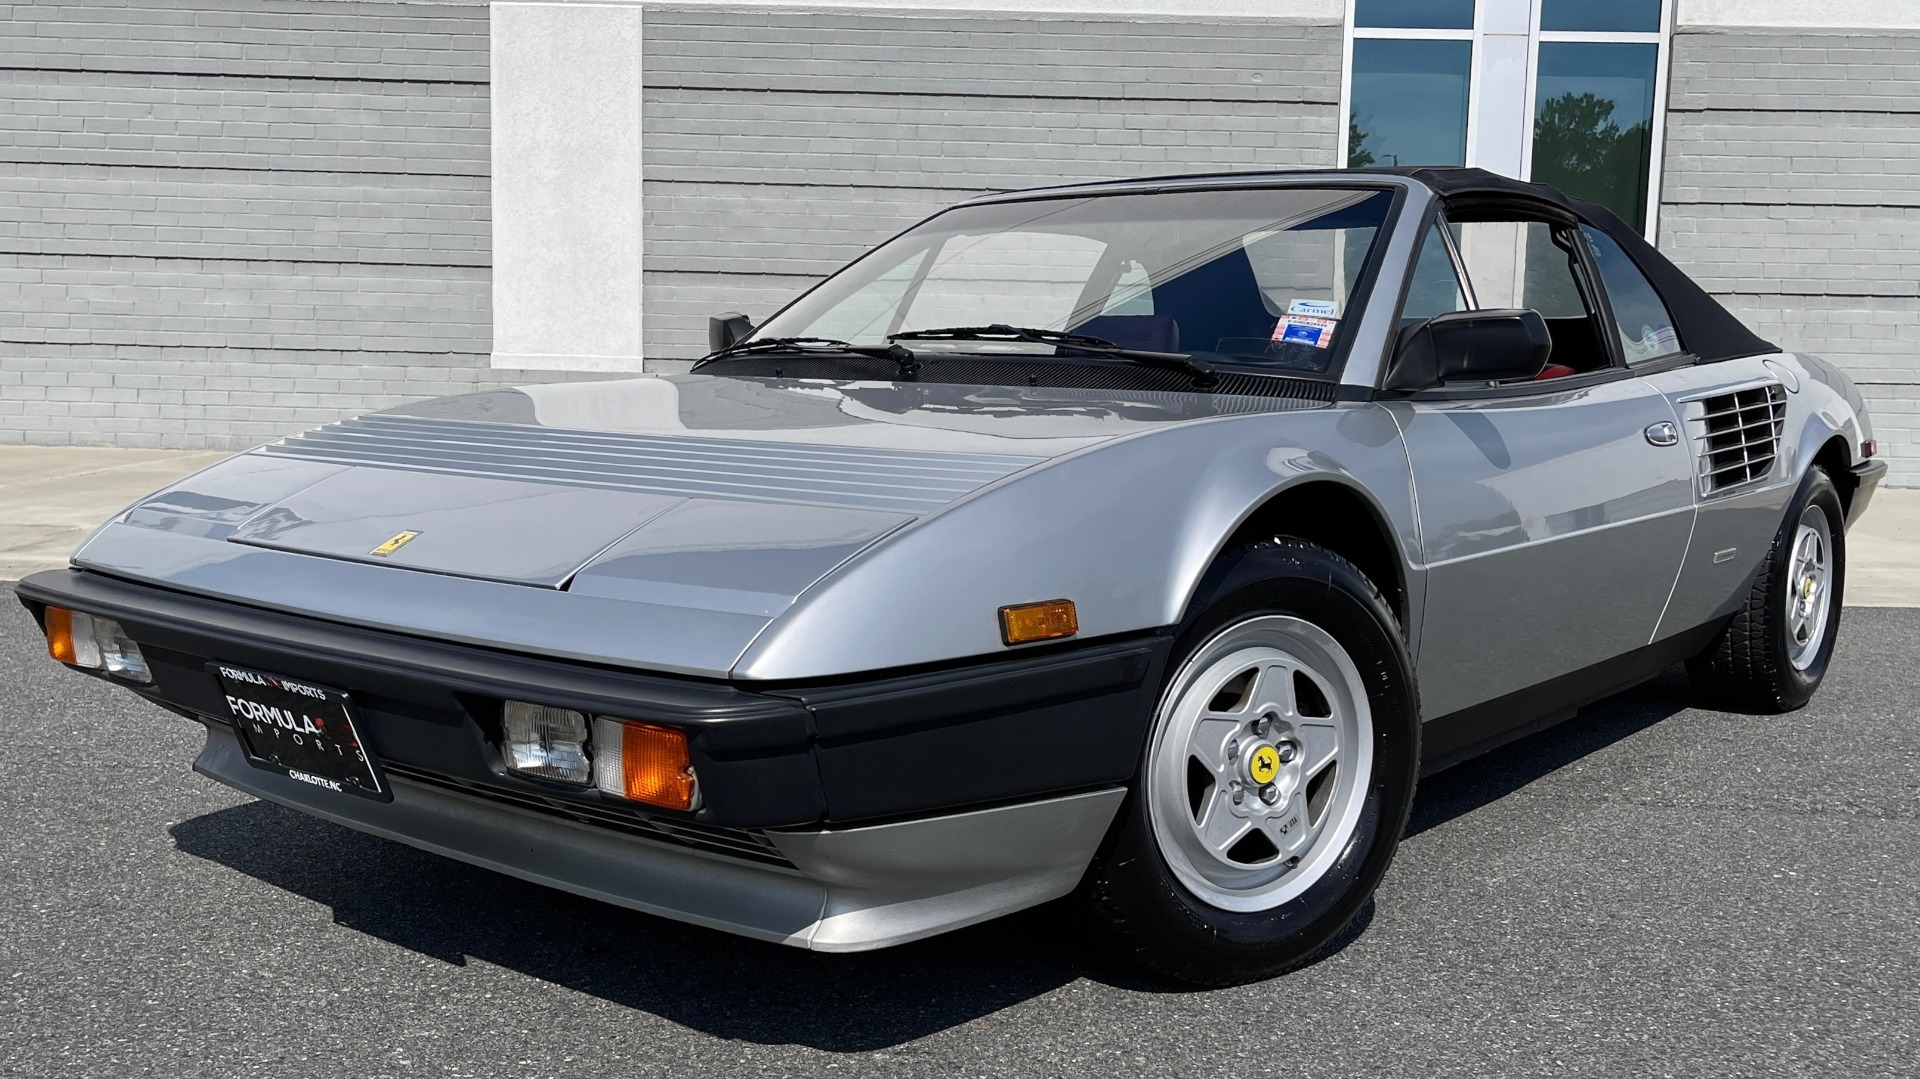 Used 1984 Ferrari MONDIAL 2+2 CABRIOLET / MID-ENGINE 3.0L V8 240HP / 5-SPEED MANUAL / LOW MILES for sale $61,999 at Formula Imports in Charlotte NC 28227 1